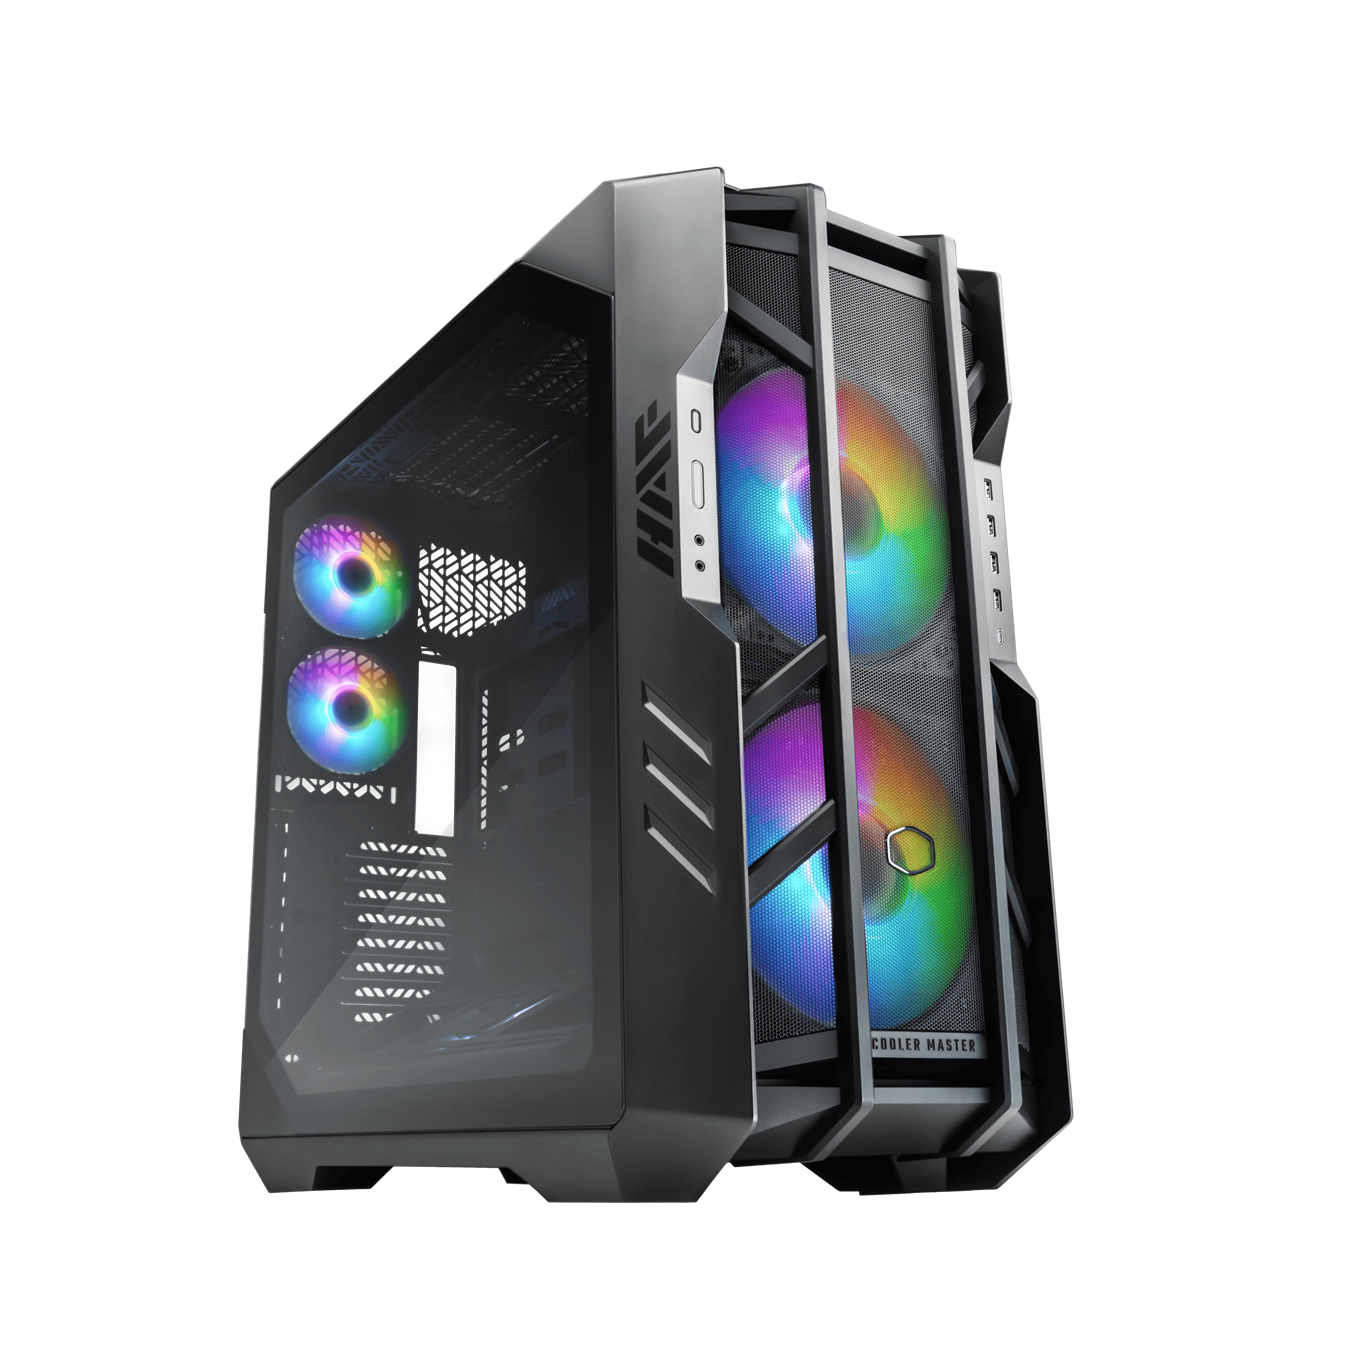 CoolerMaster H700-IGNN-S00 HAF 700 Full ATX Tower Gaming Case